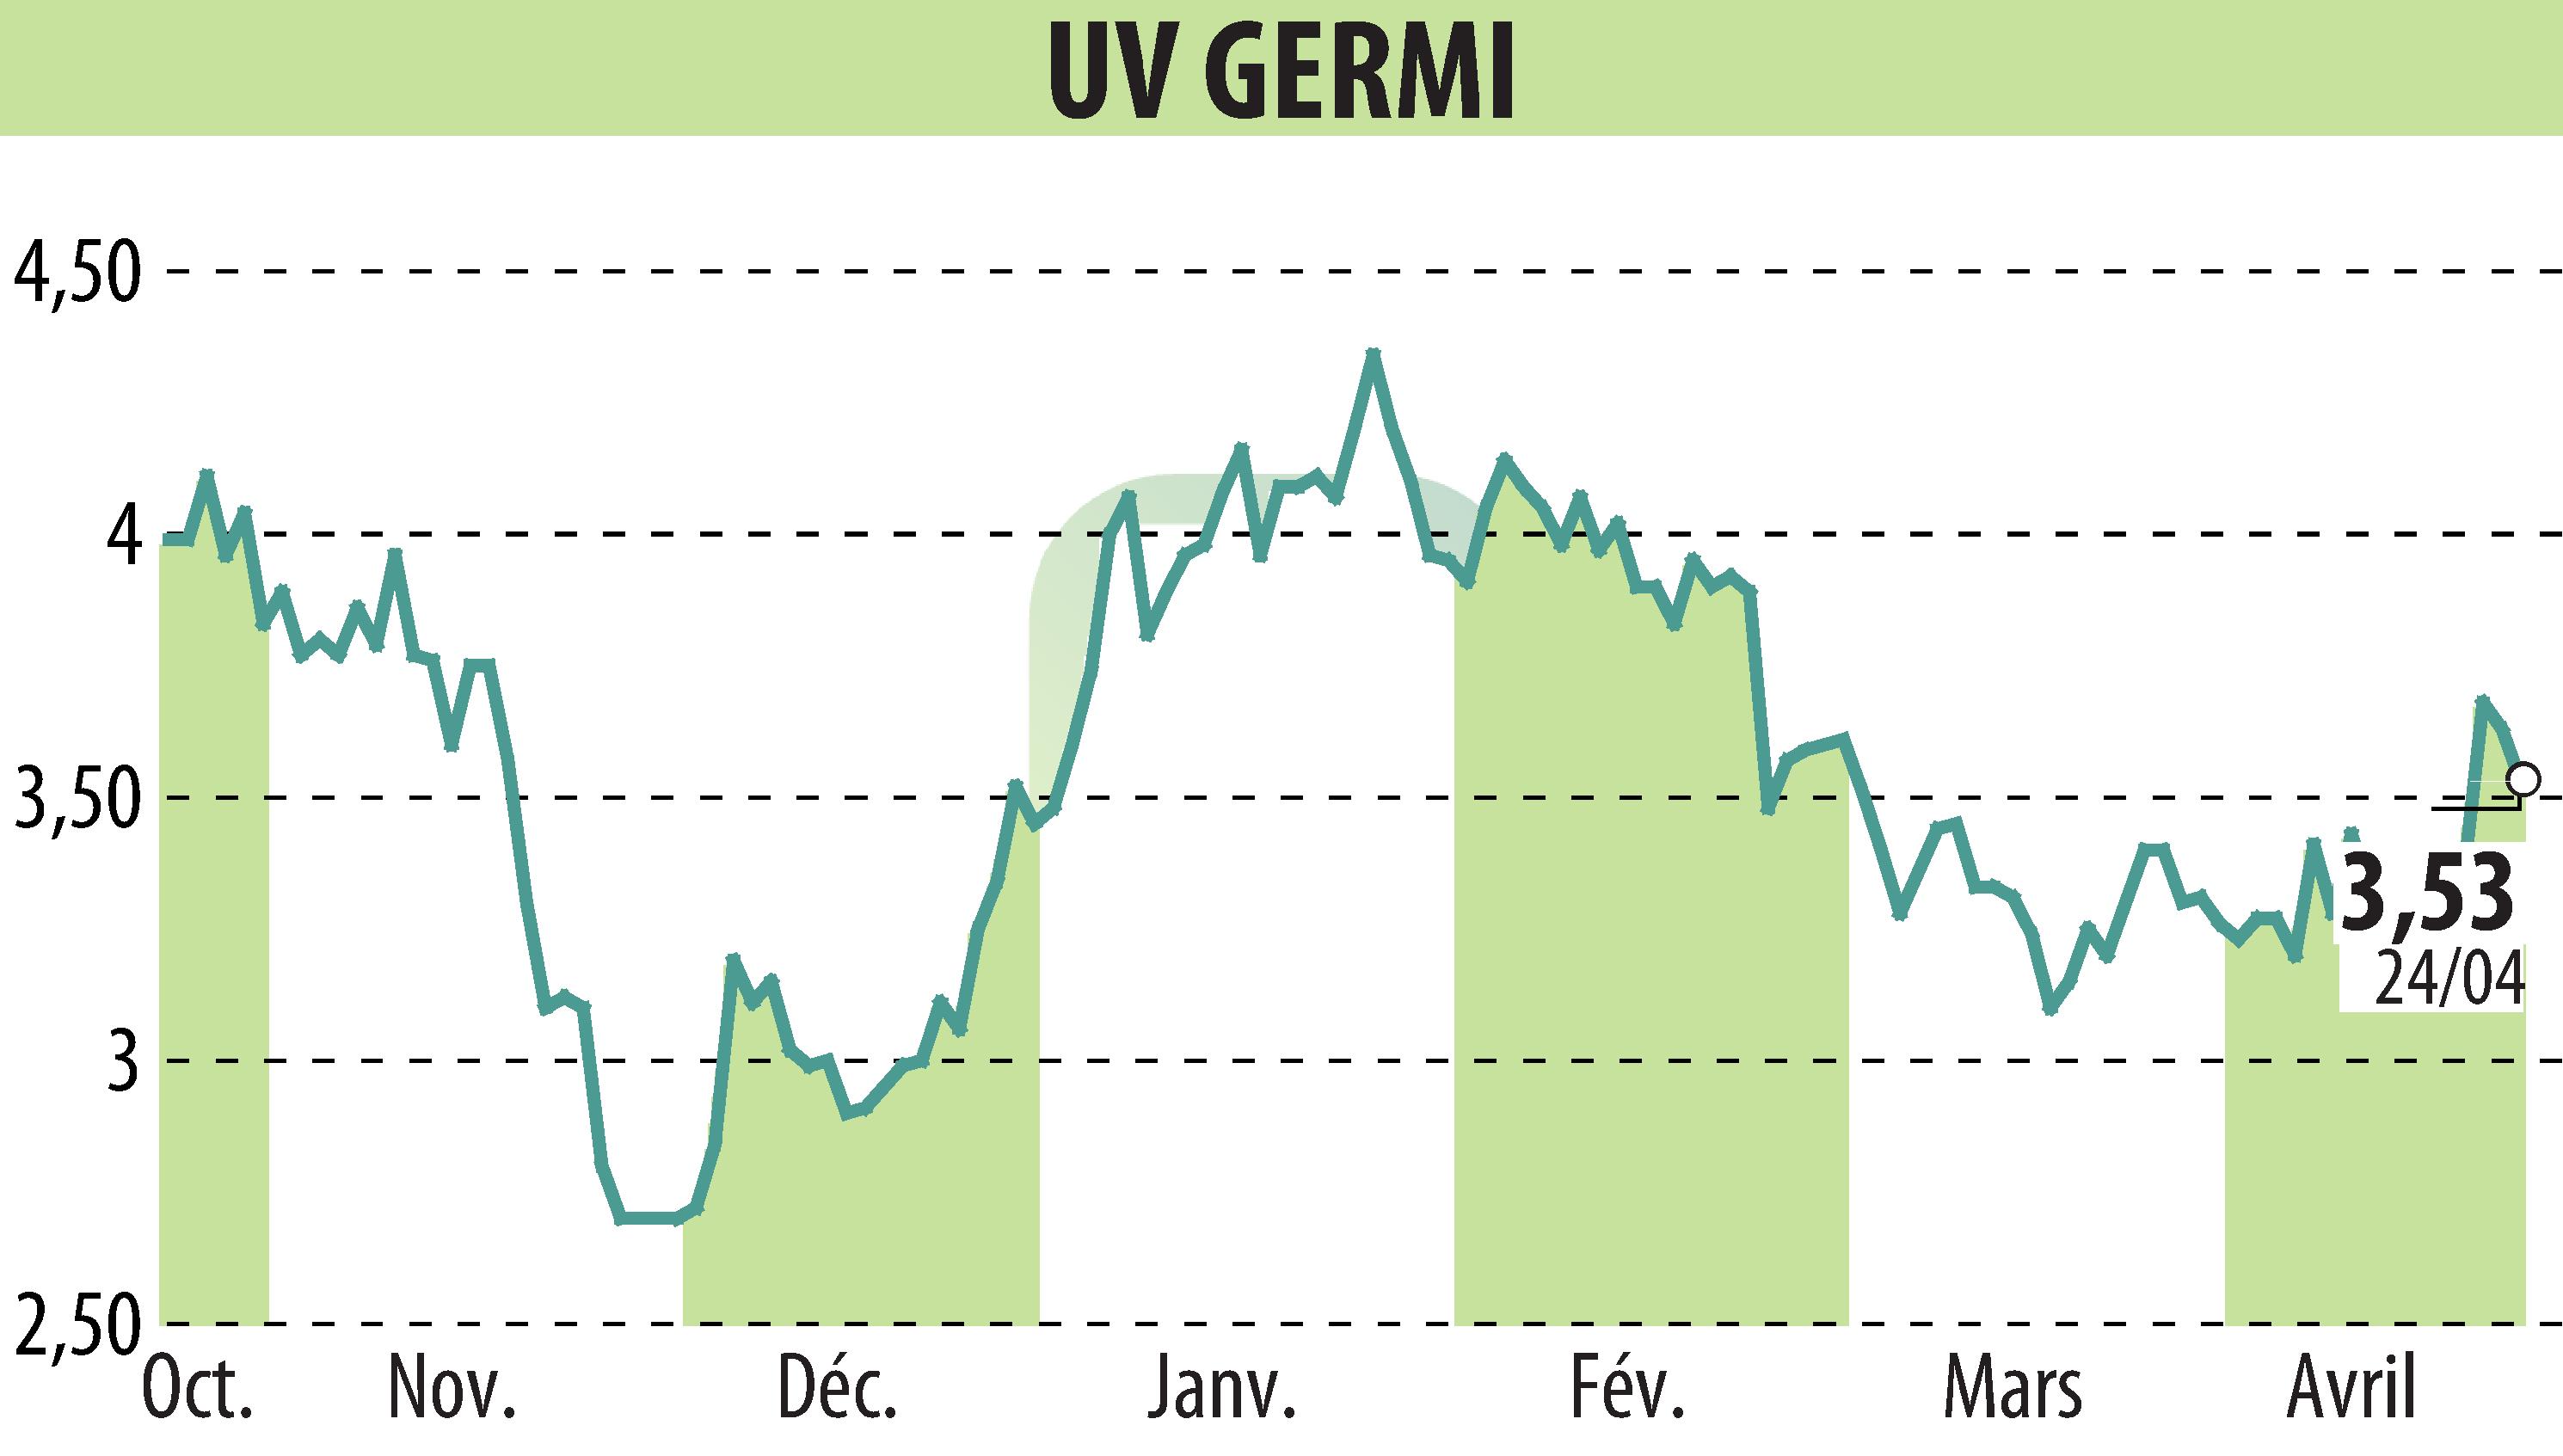 Stock price chart of UV GERMI (EPA:ALUVI) showing fluctuations.